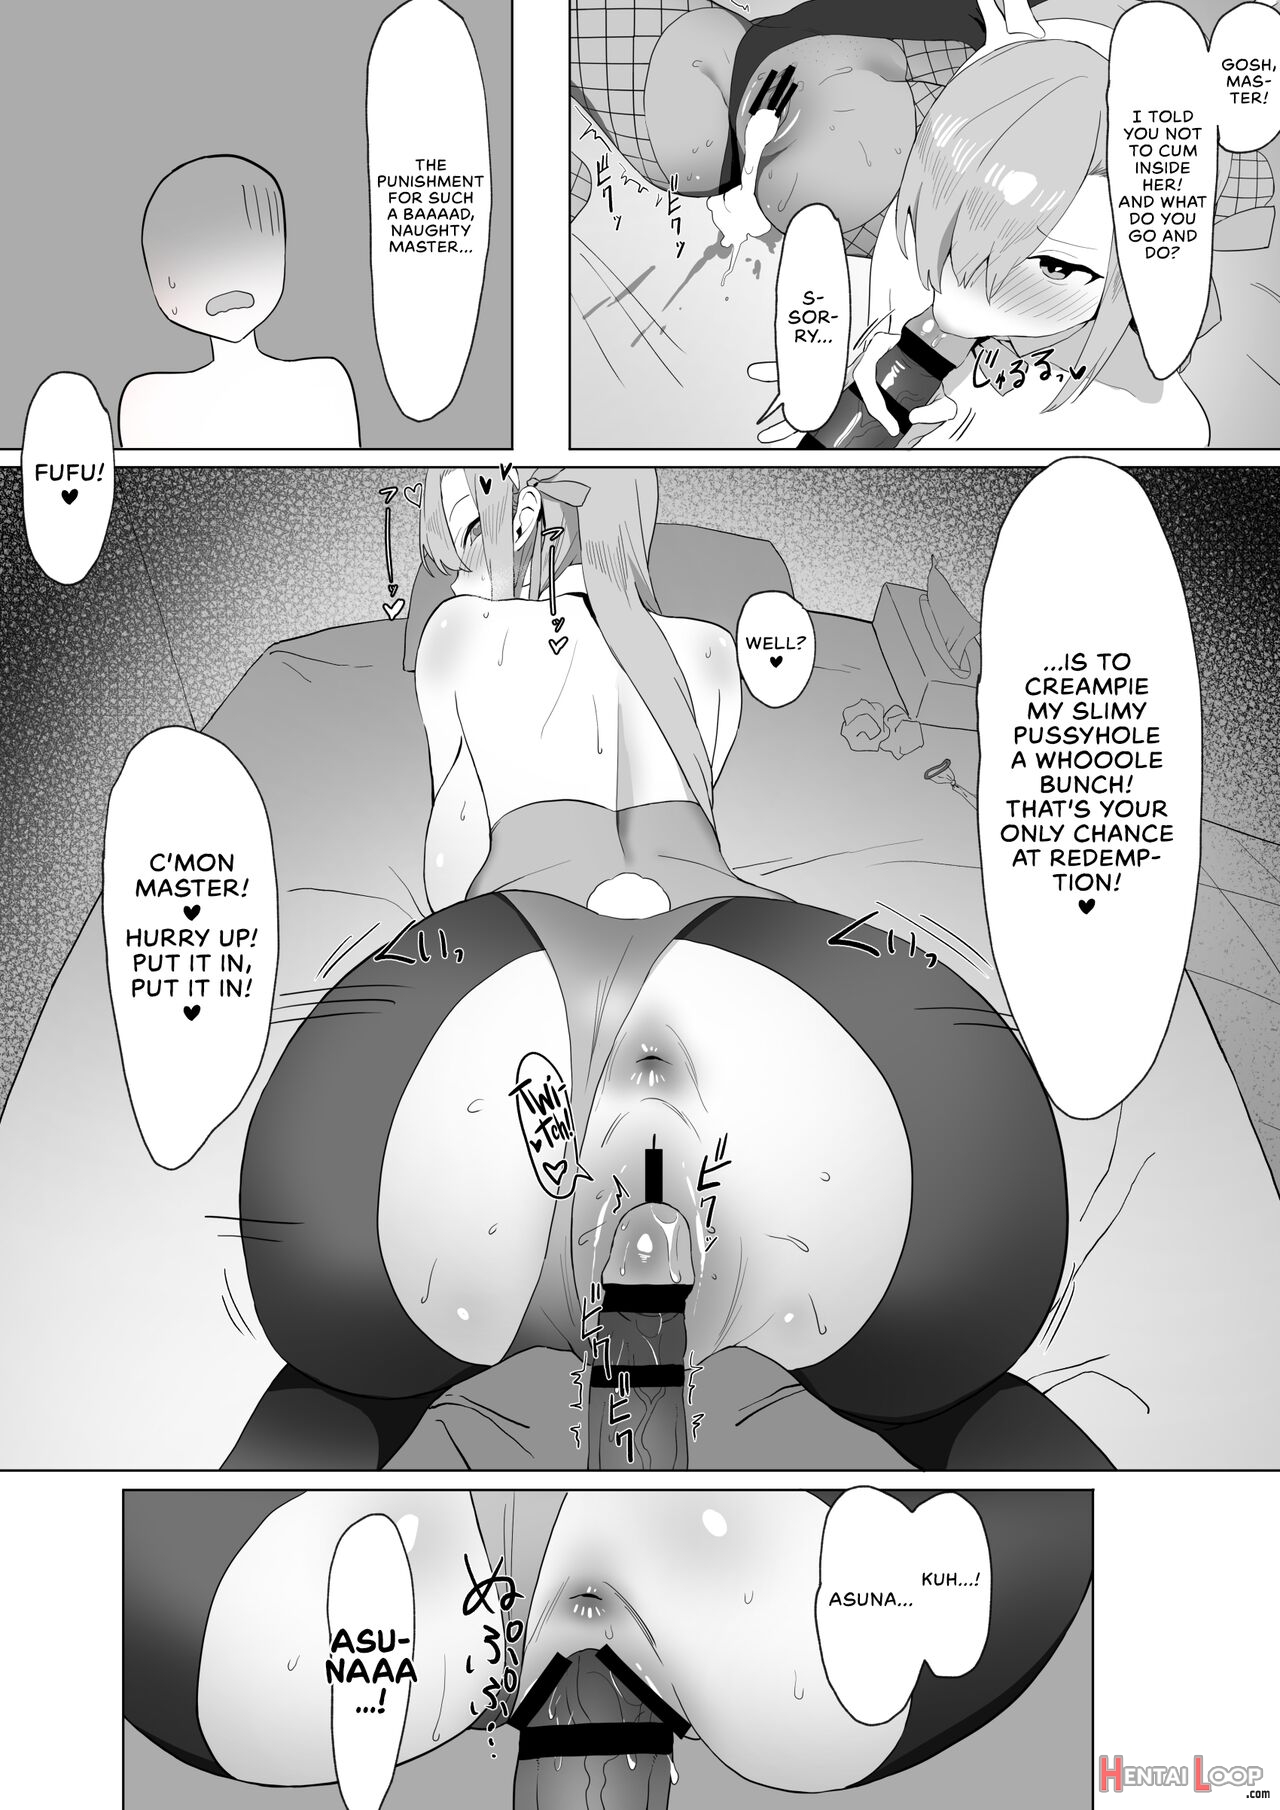 Asuna And Karin, At Your Service! page 14